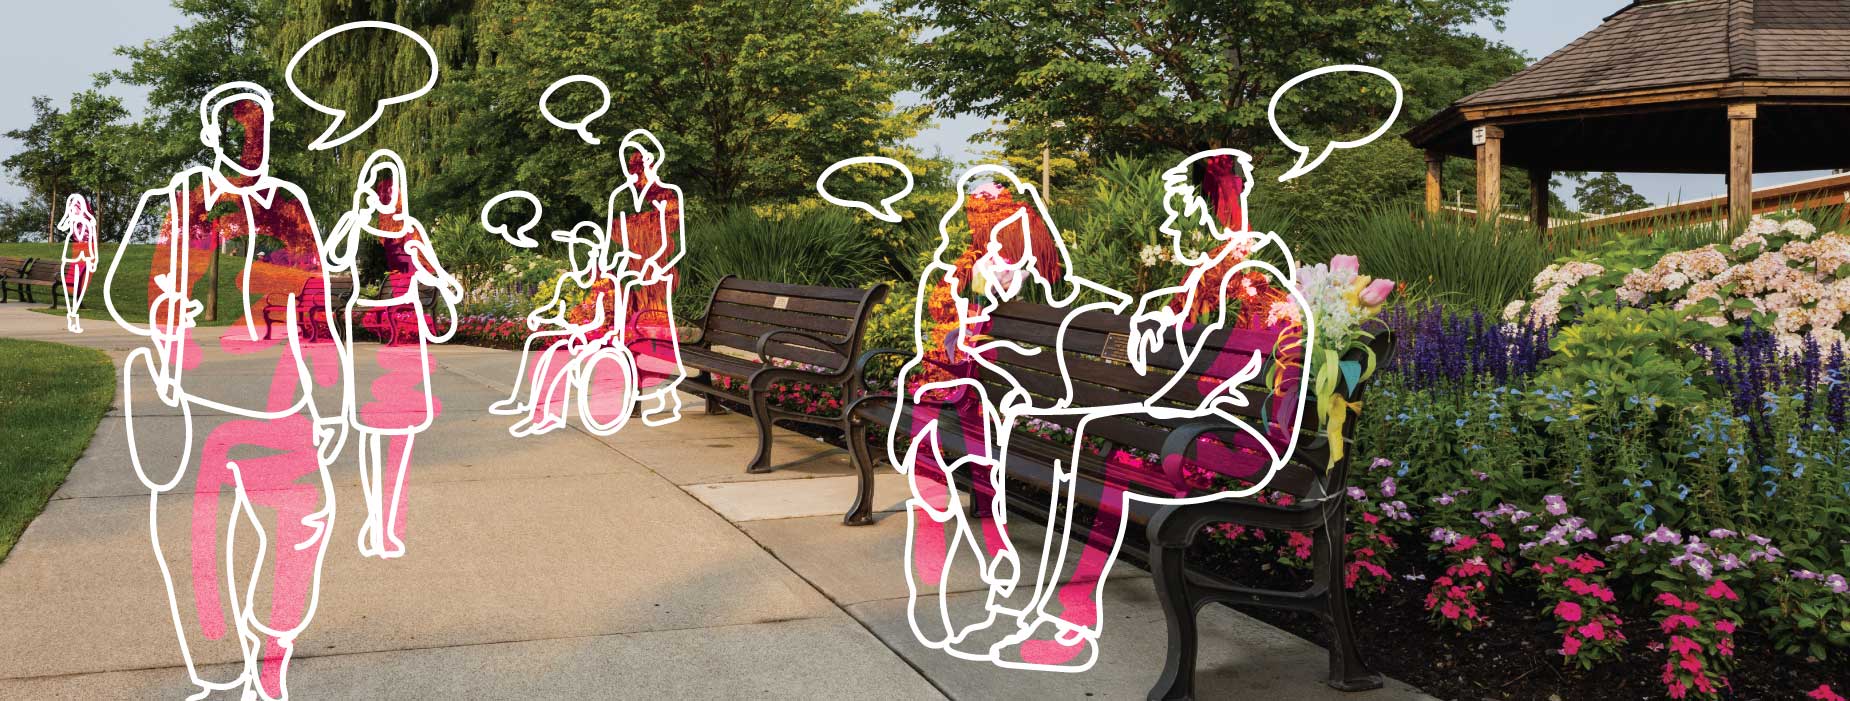 Photo of a park trail, benches and gardens overlayed with illustrations of people walking along the path and sitting on the benches with speech bubbles over their heads.